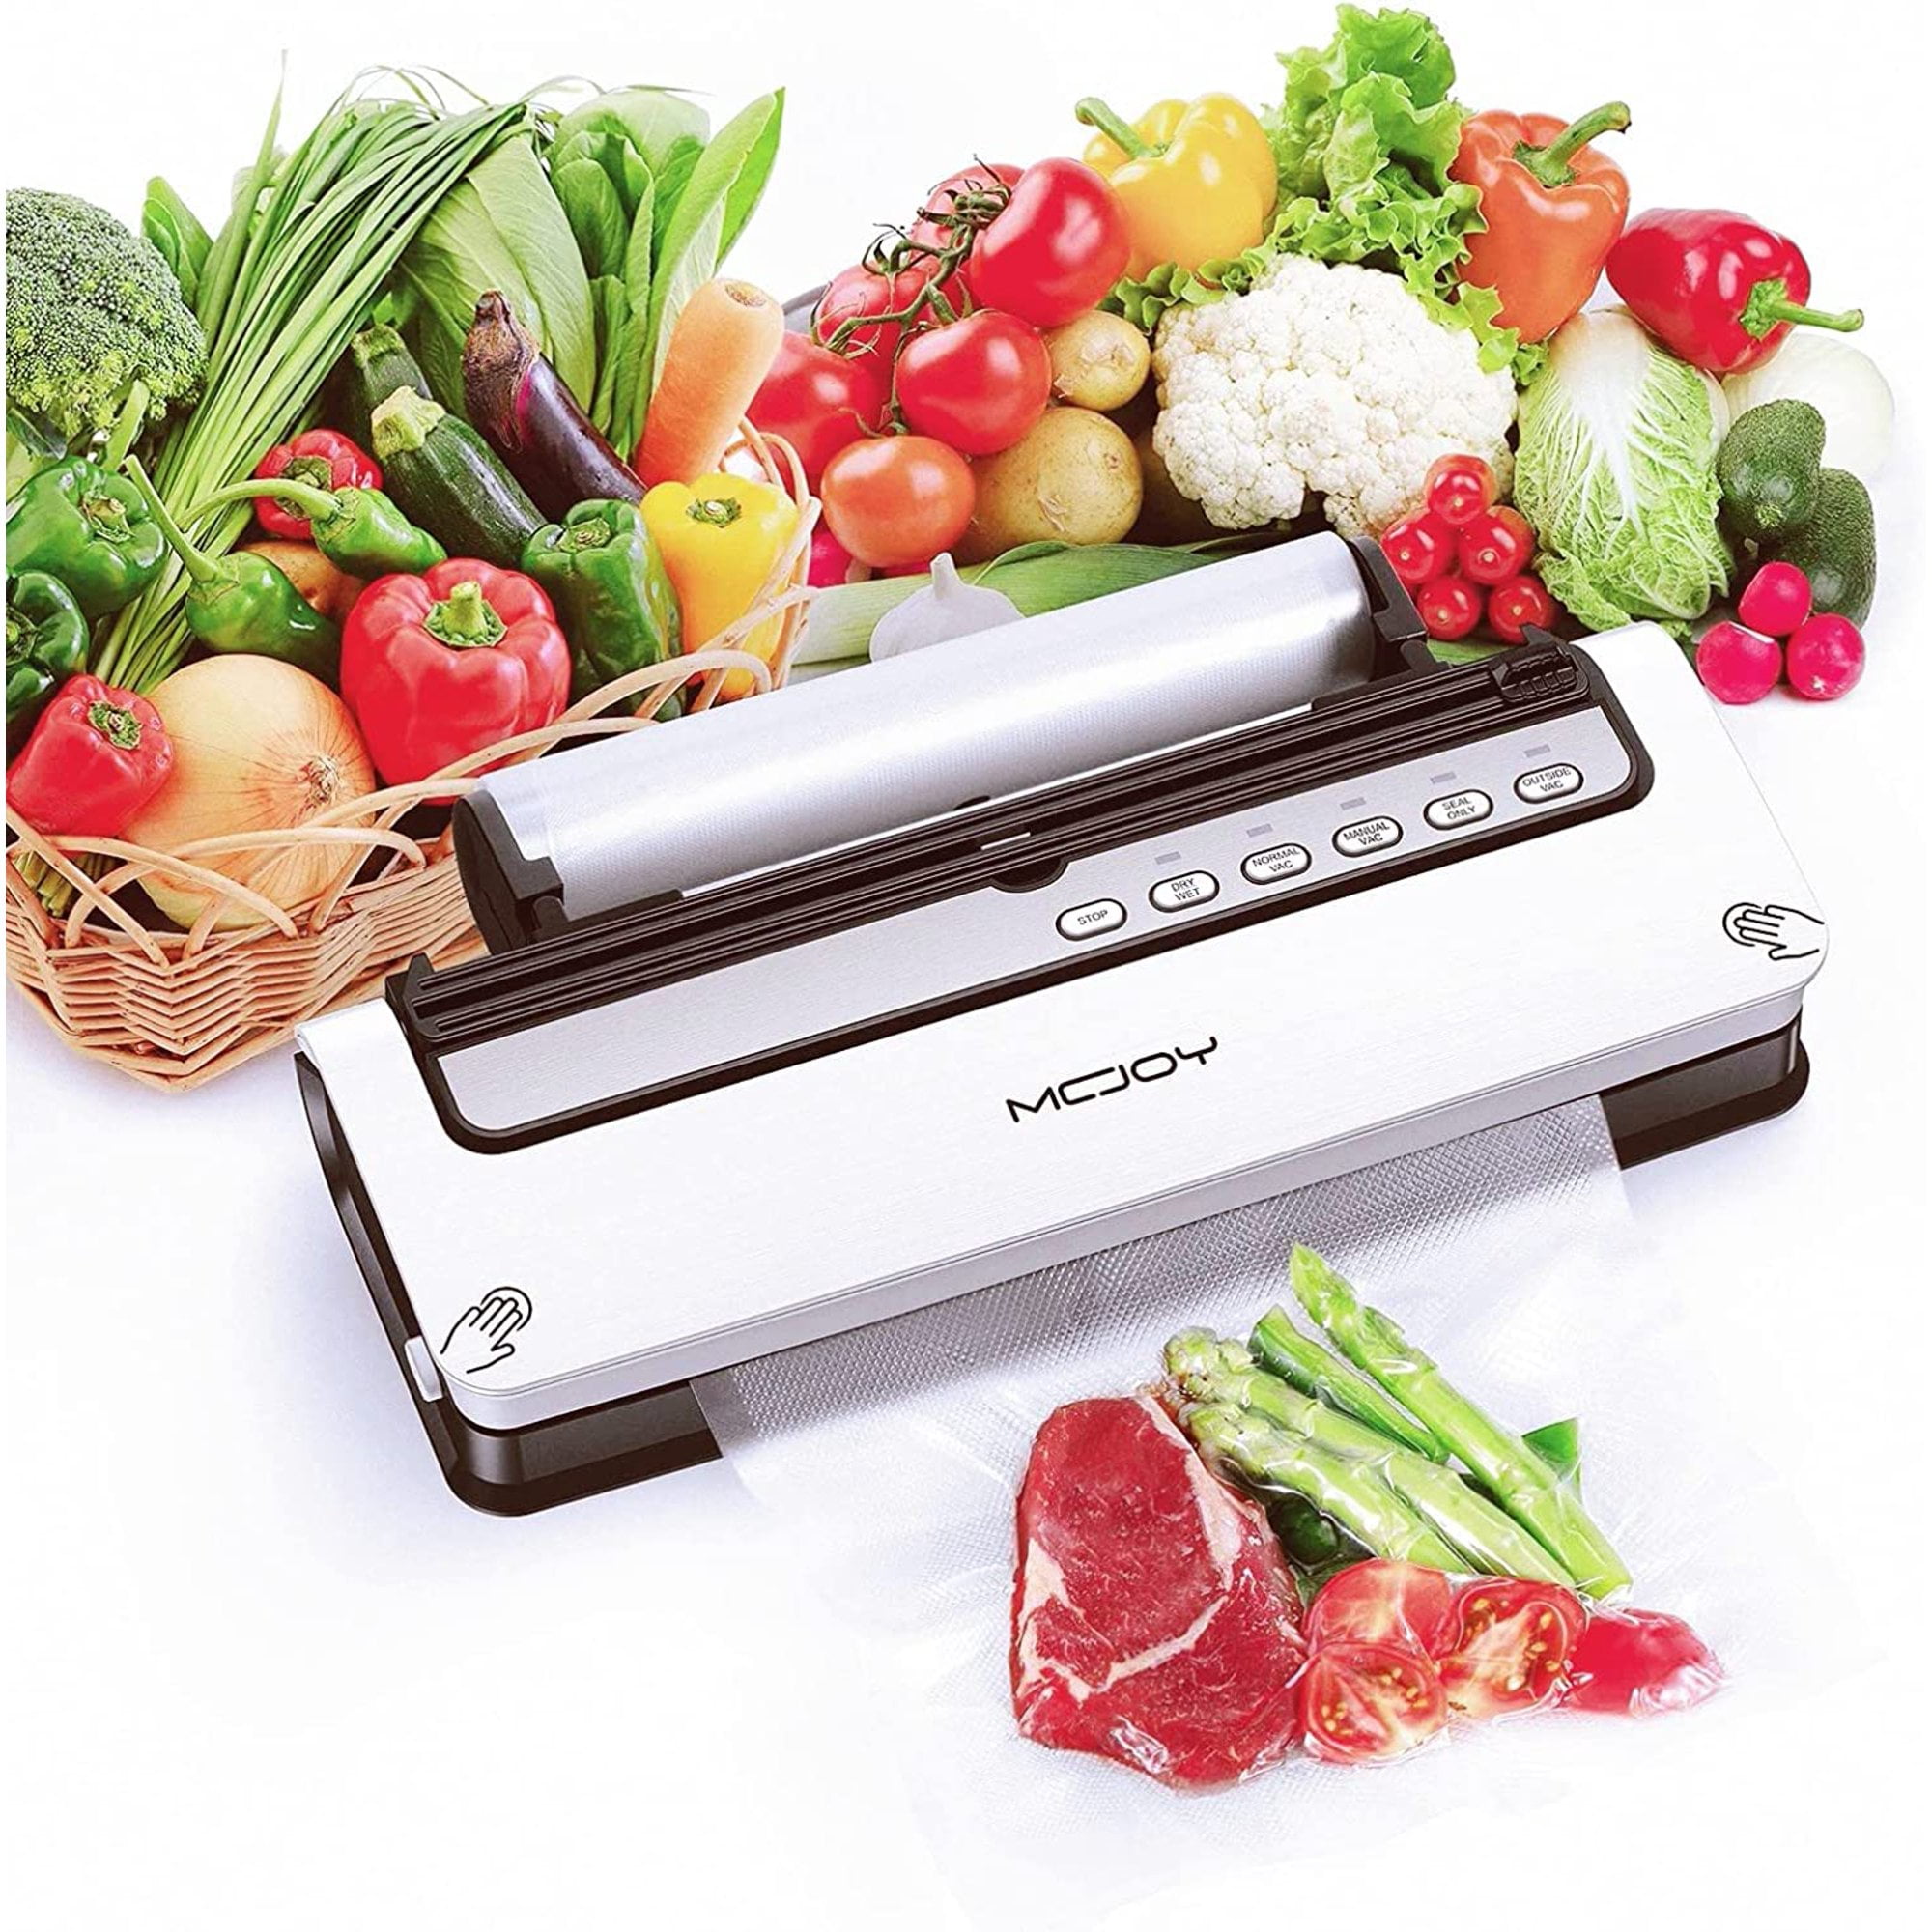 2023 Updated Vacuum Sealer Machine, MEGAWISE Food Sealer w/Starter Kit, Dry  & Moist Food Modes, Compact Design with 10 Vacuum Bags & Bulit-in